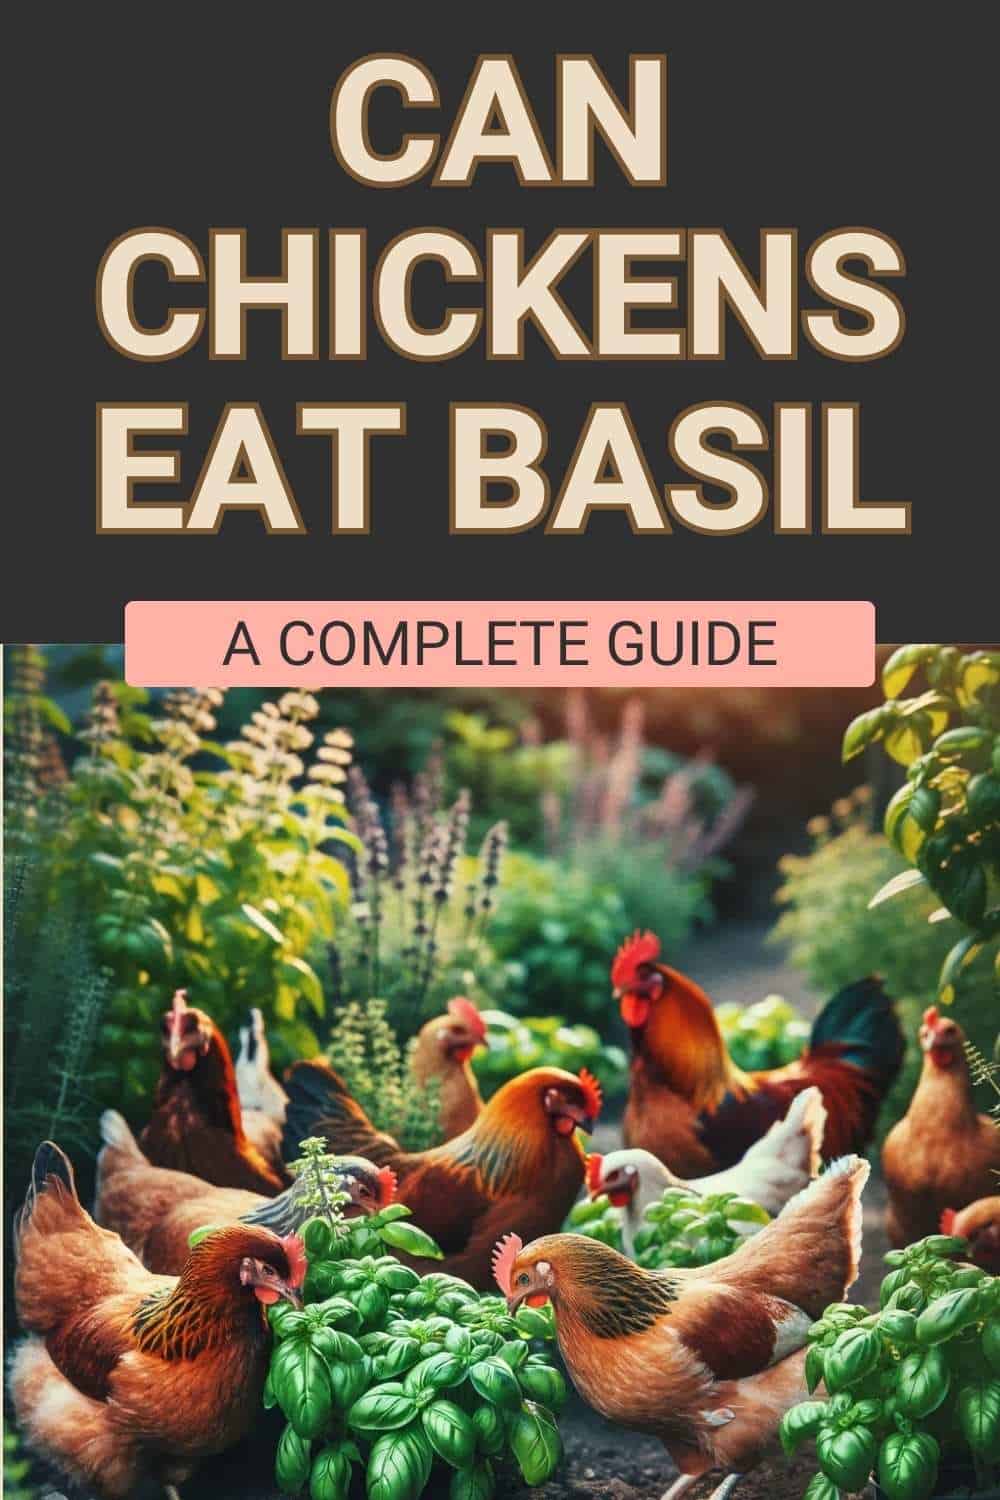 Chickens Eat Basil